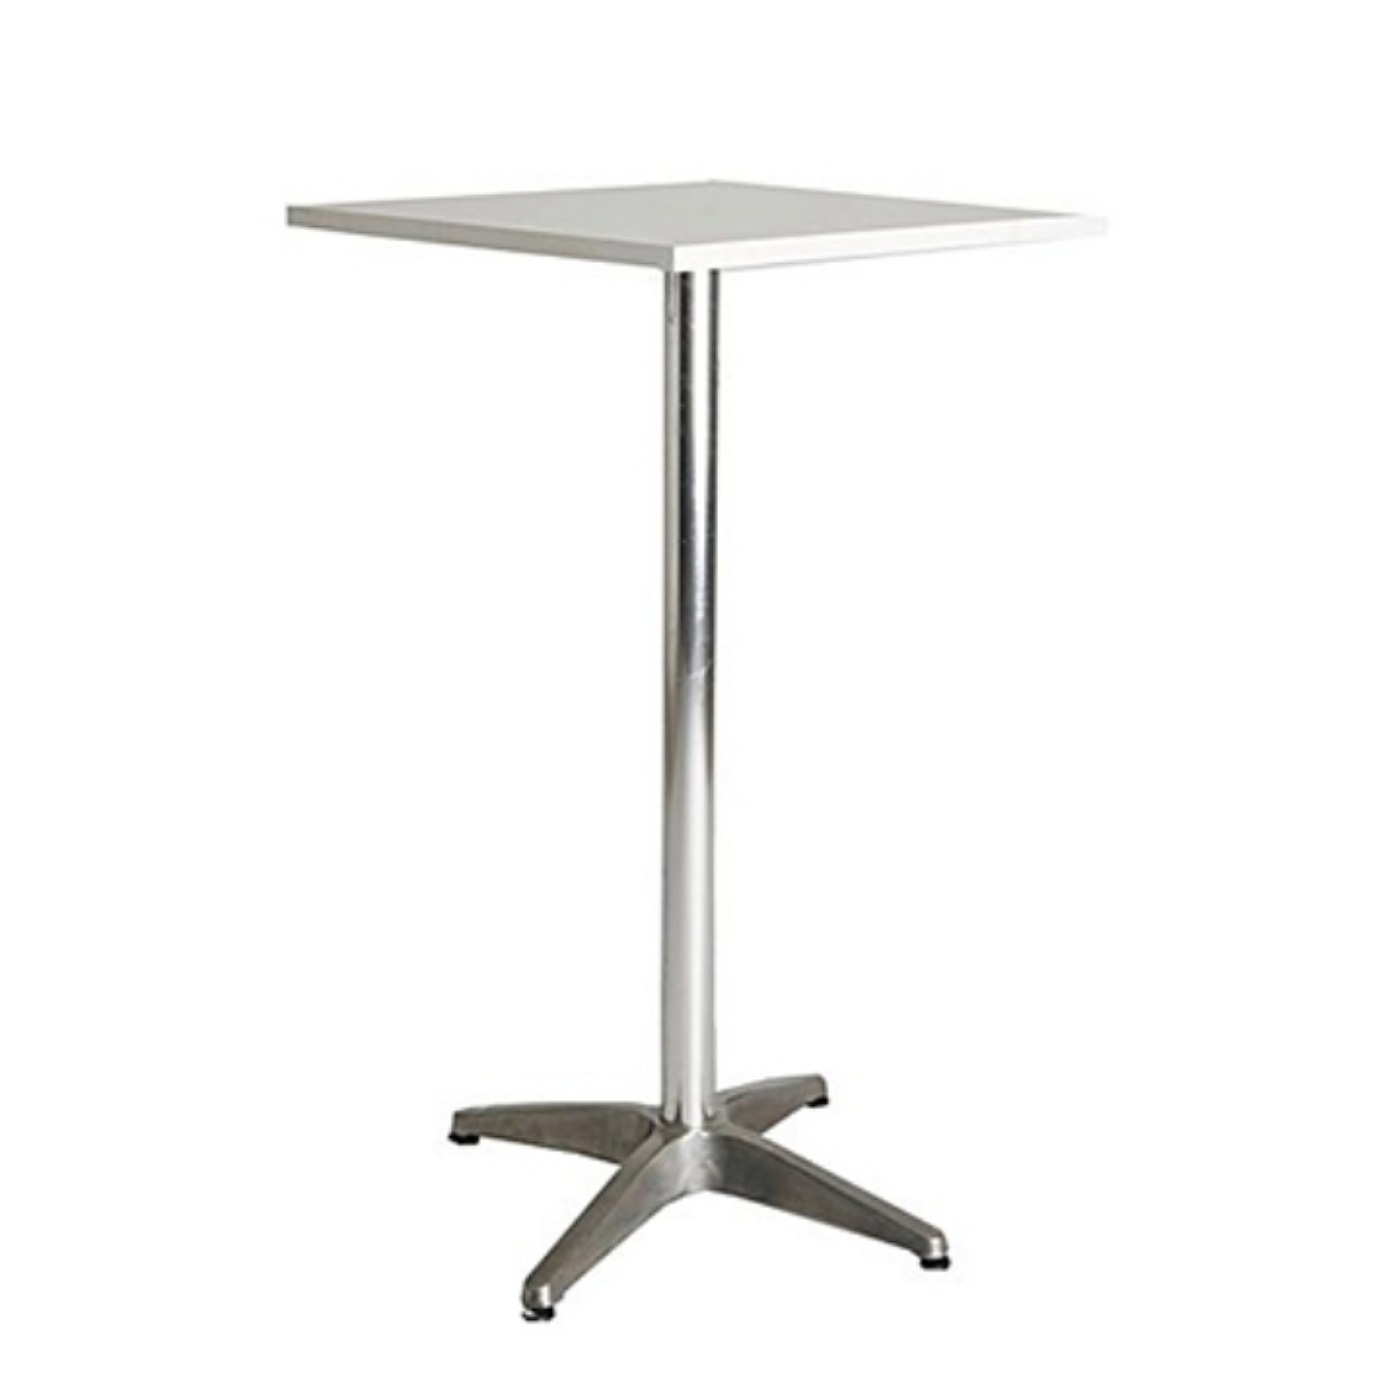 Crome Cocktail Table With Square White Top.